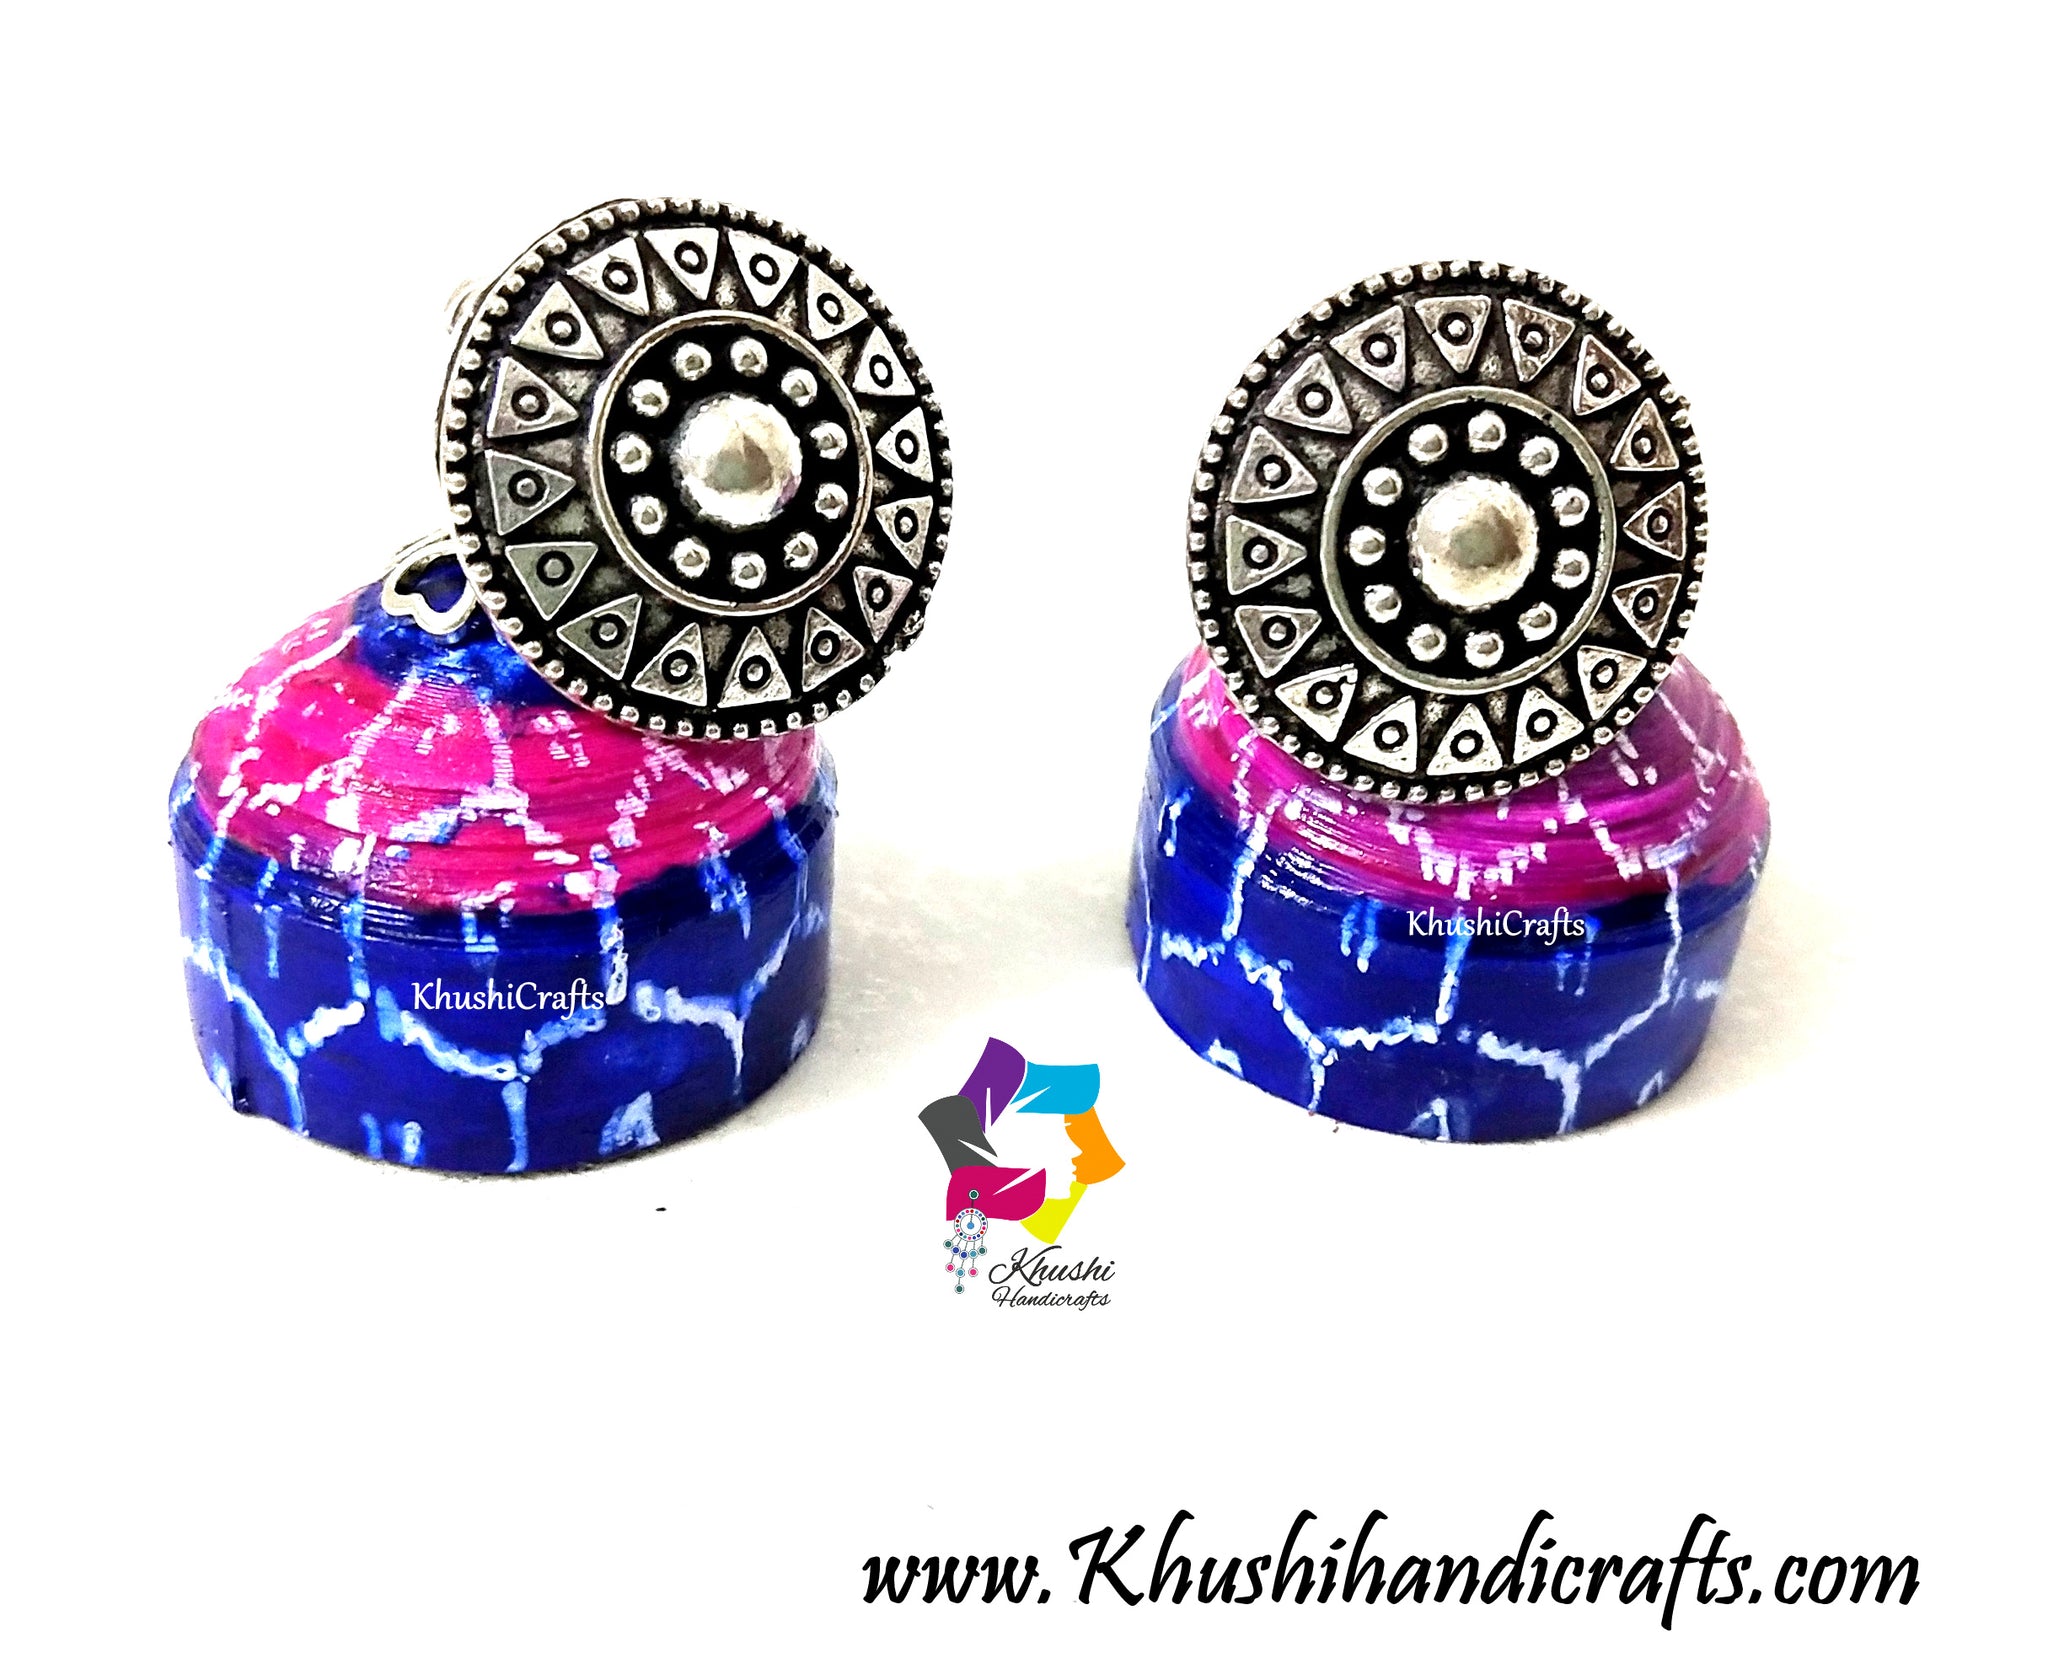 E0500 Classy crafted earrings with beautiful art work pattern and wit   SwagQueen